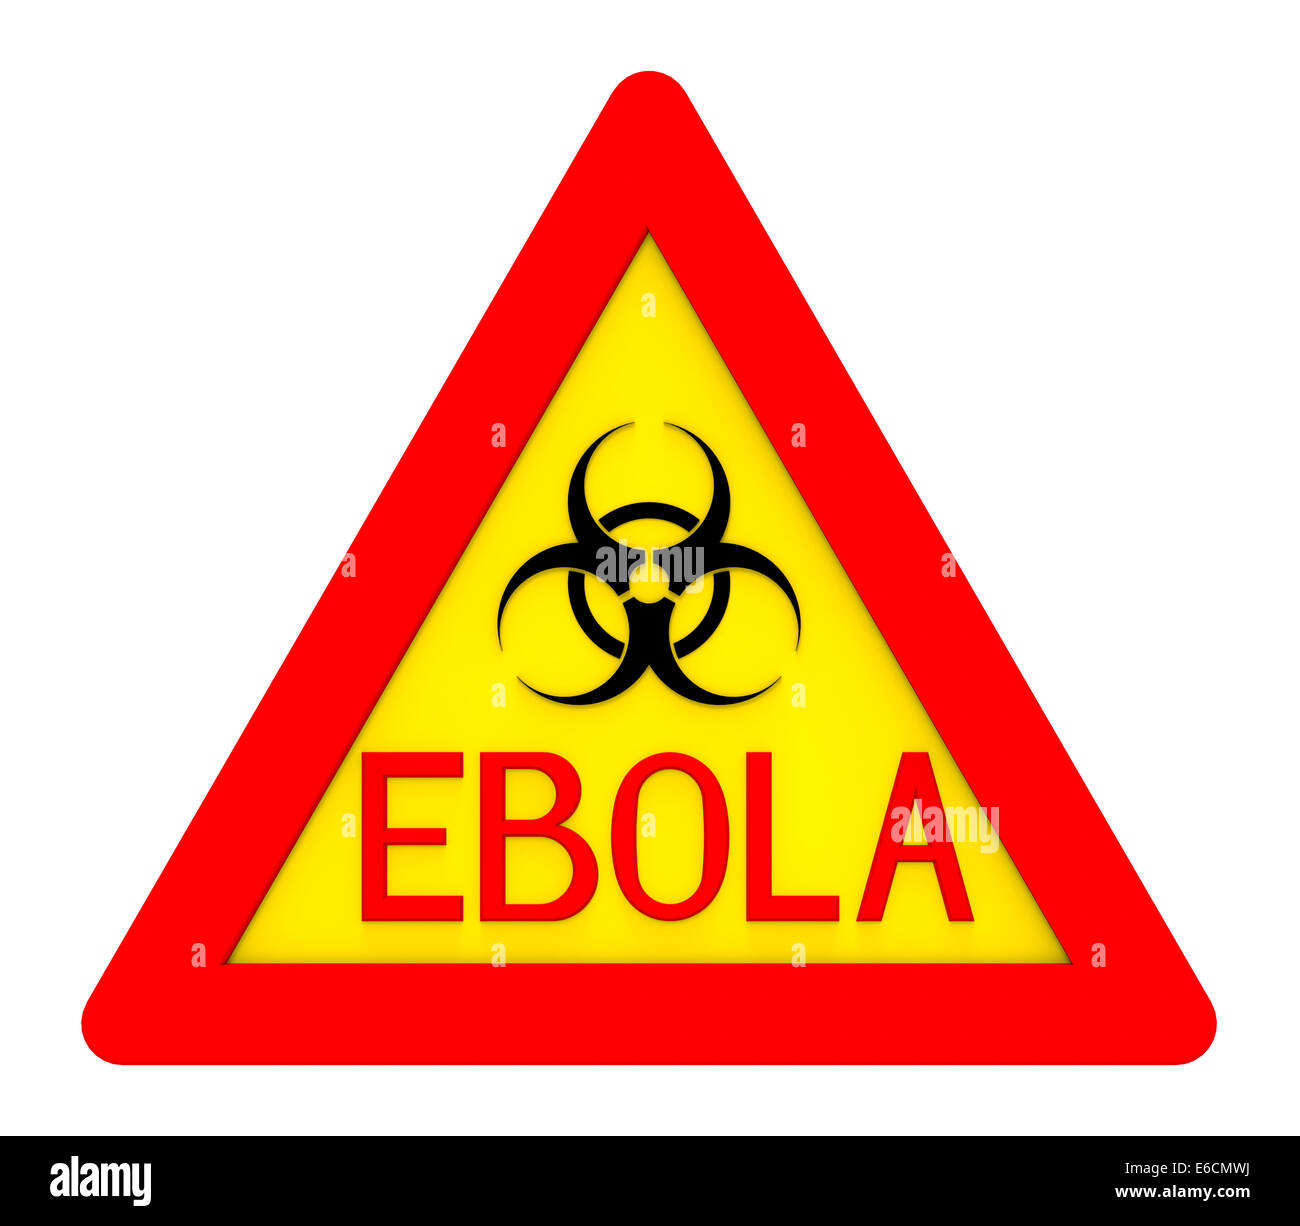 Ebola biohazard sign isolated on white 3d render Stock Photo